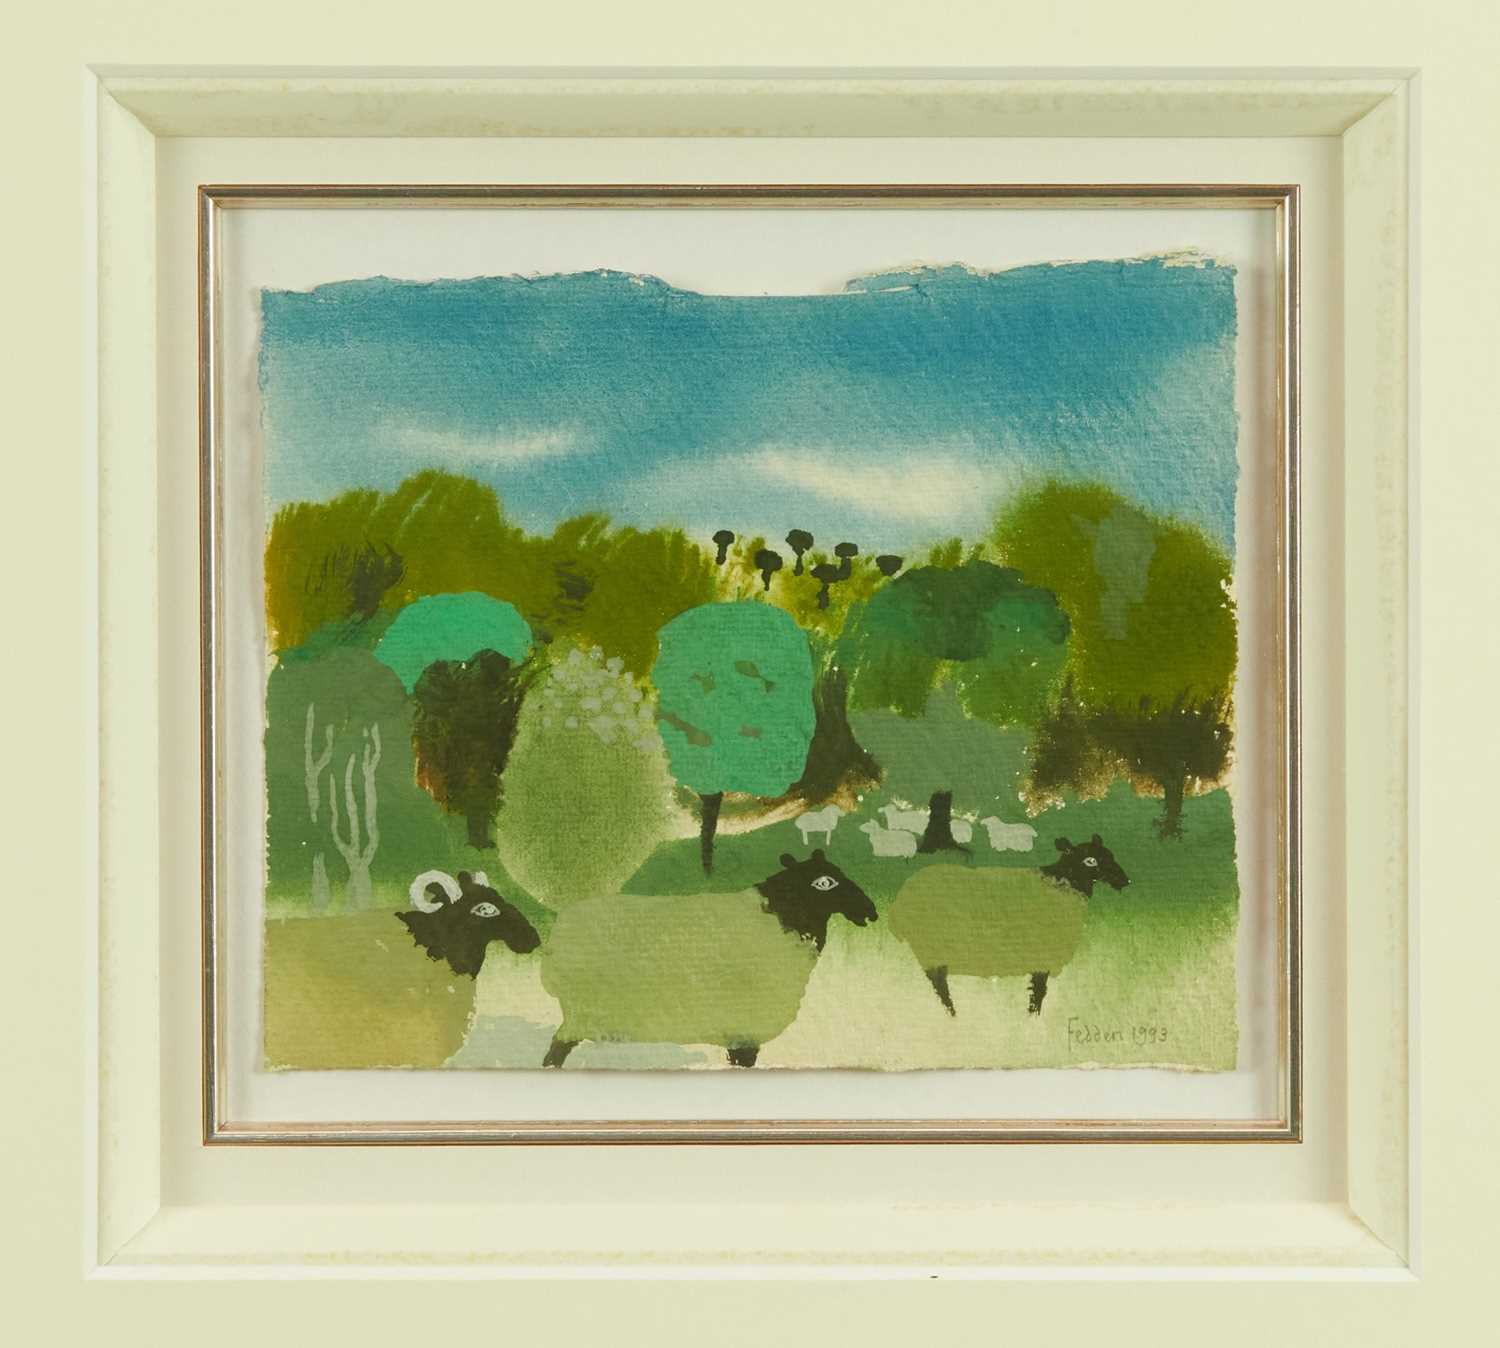 Lot 1150 - *Mary Fedden (1915-2012) watercolour - Sheep Grazing, signed and dated 1993, 14cm x 17.5cm, in glazed silvered framed